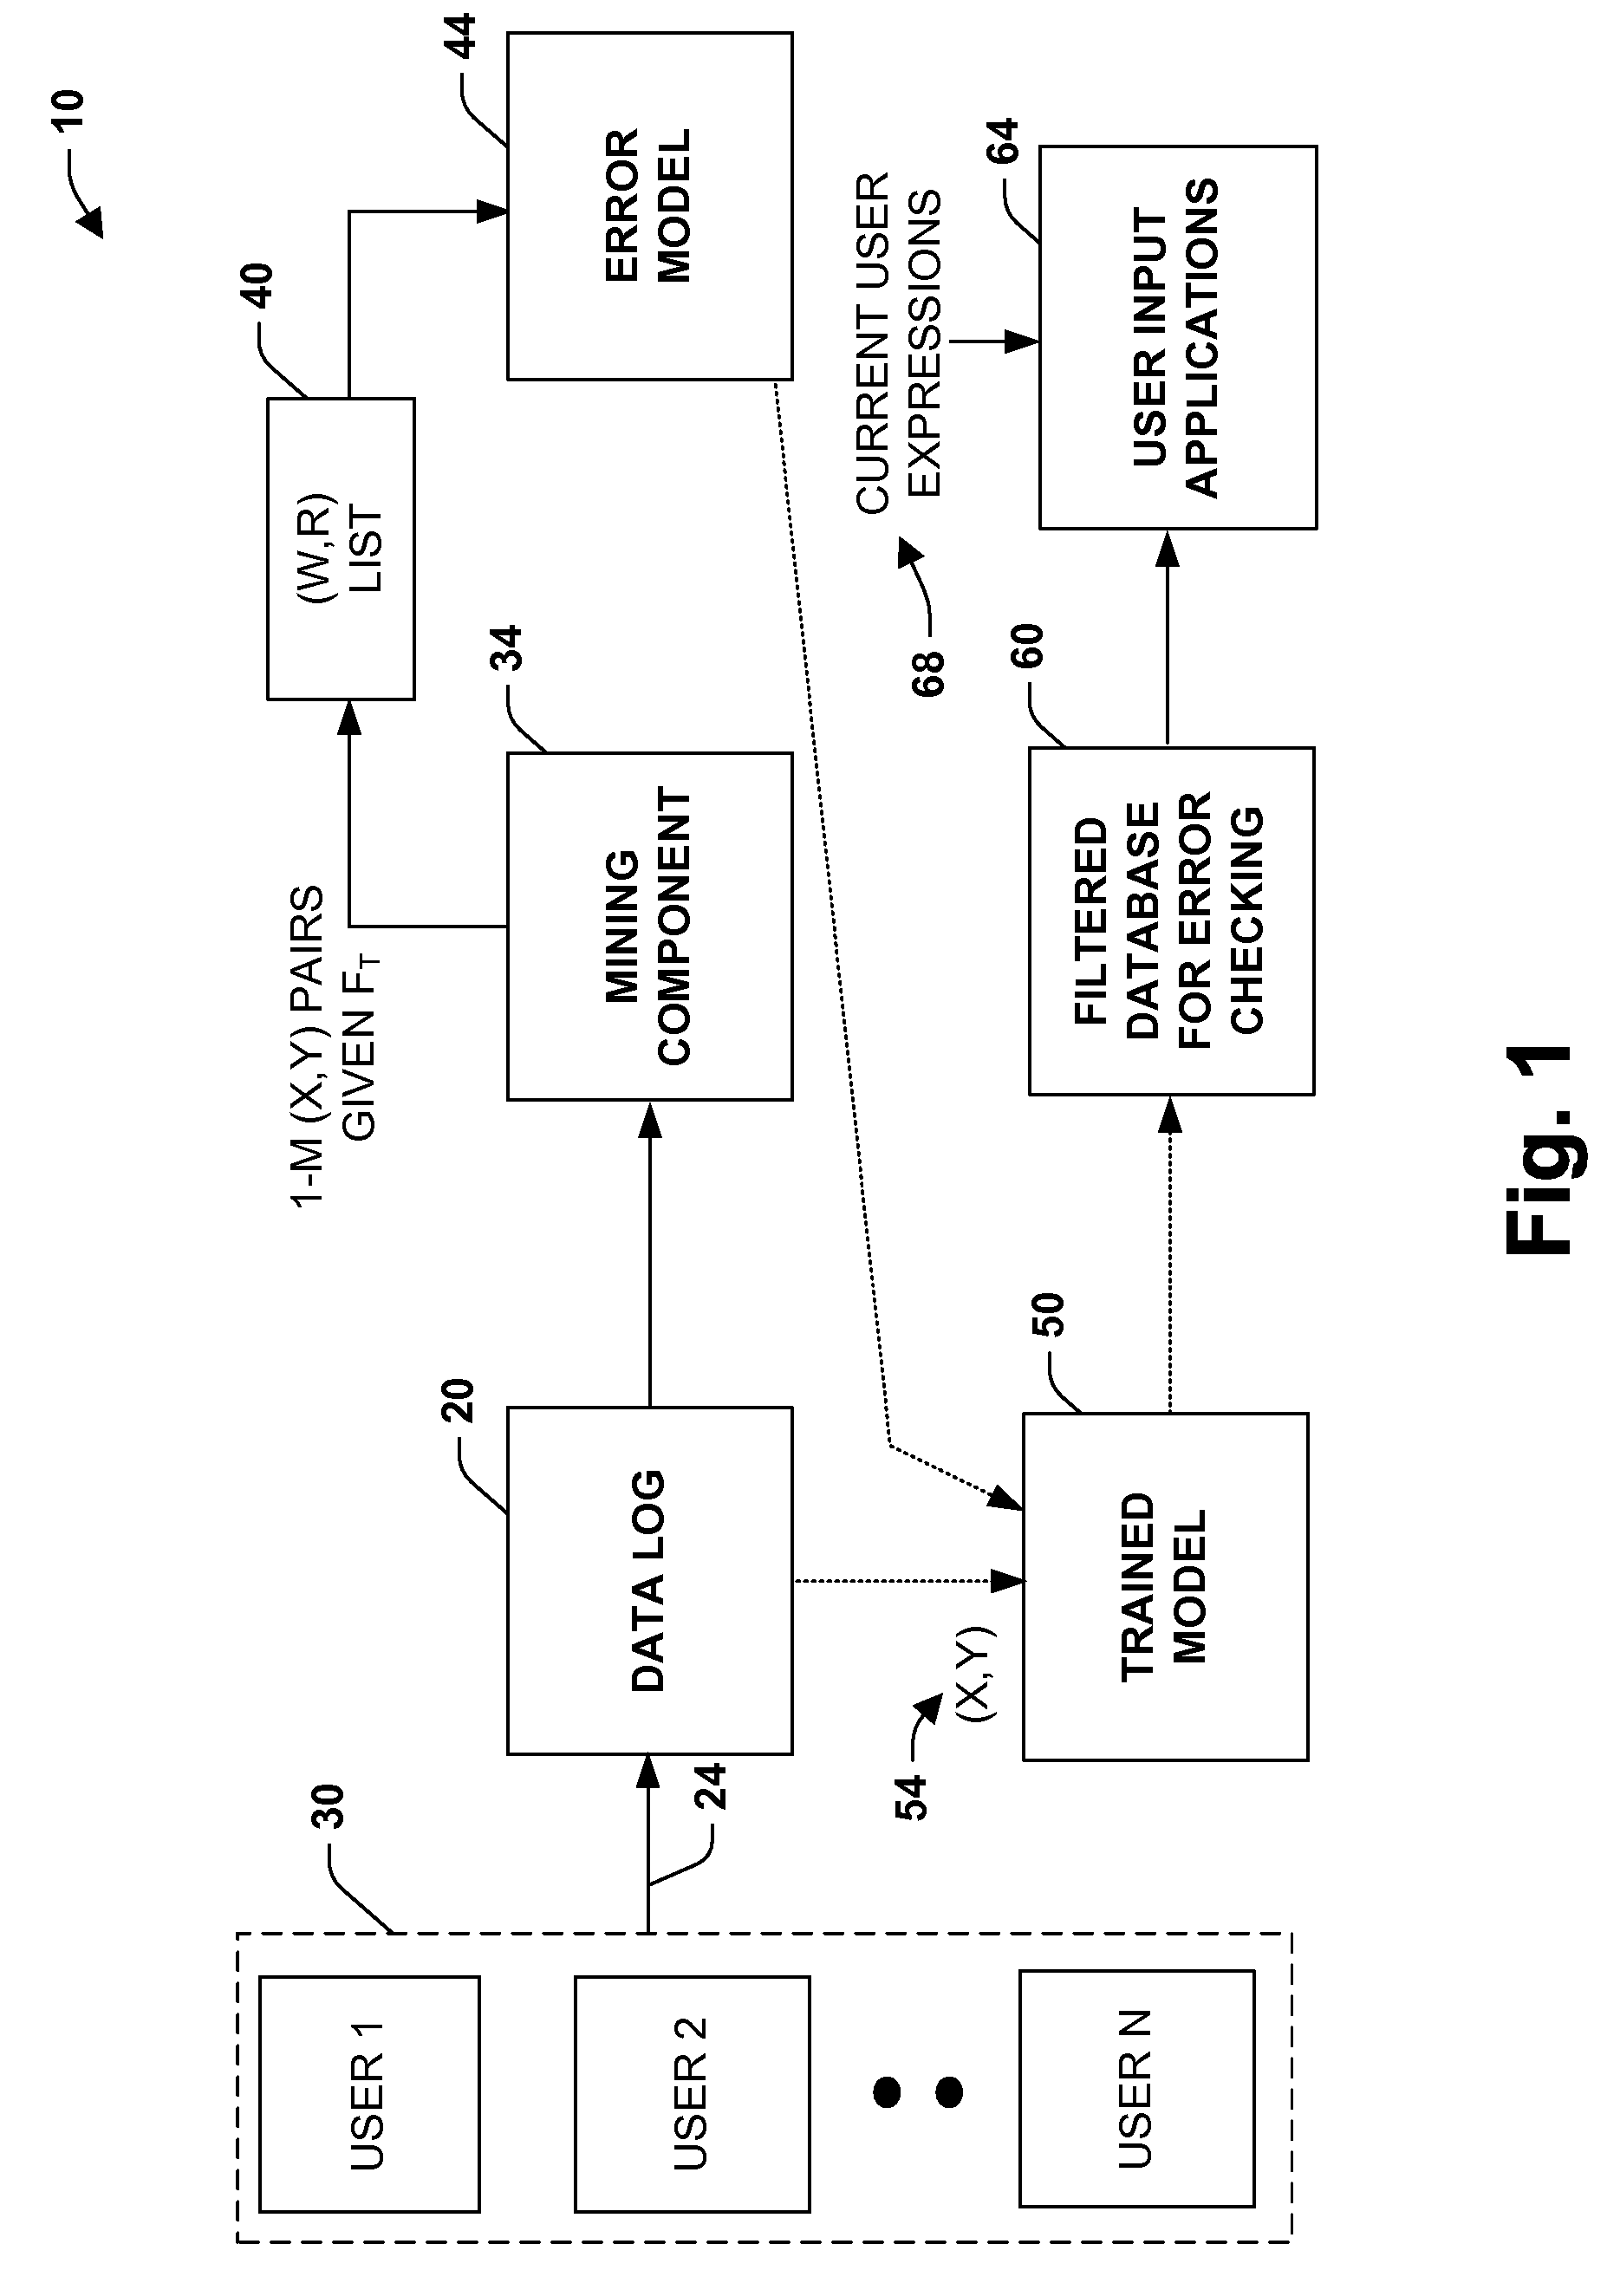 Automated error checking system and method